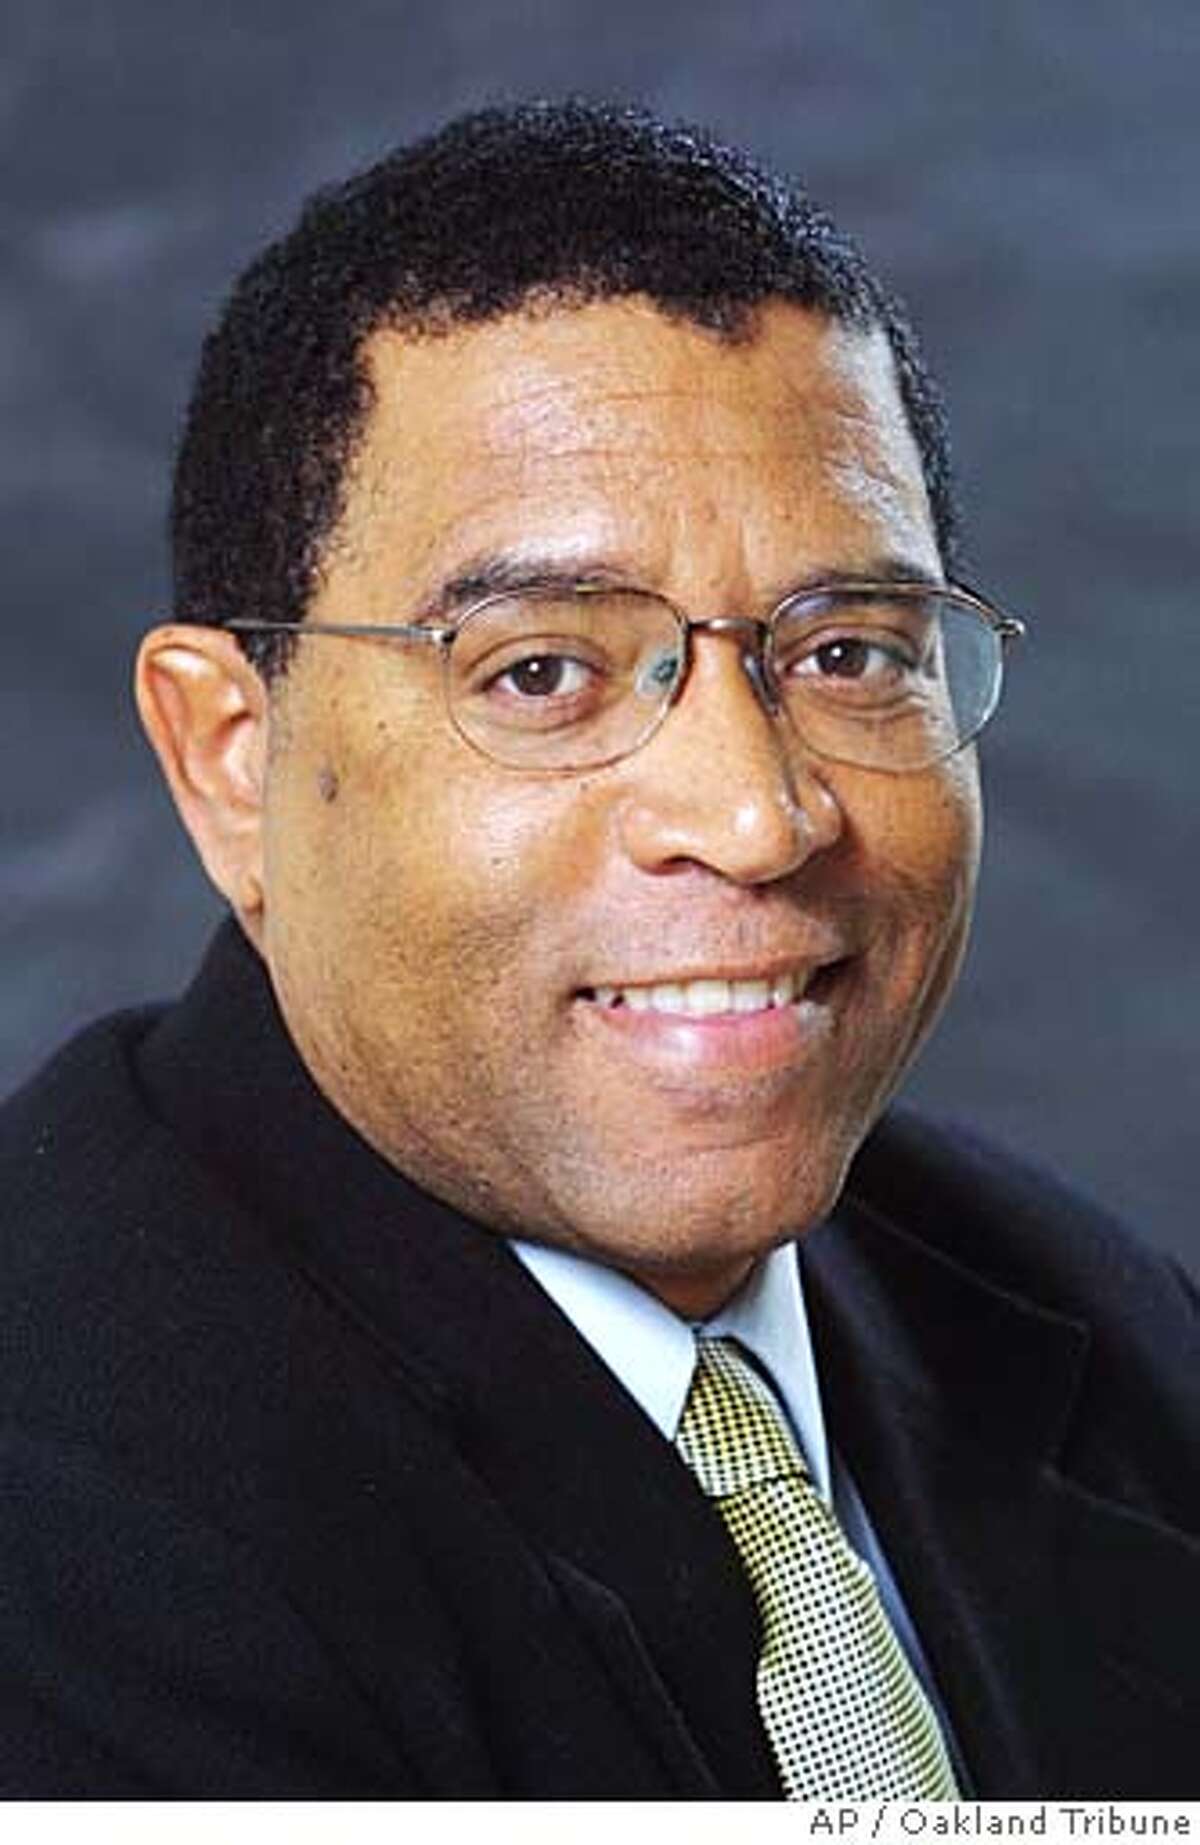 Former Oakland Tribune reporter Chauncey Bailey is seen in this undated photo. Bailey, the editor of the Oakland Post was shot to death in Oakland, Calif., Thursday, Aug. 2, 2007, in what police believe was a deliberate hit. Bailey, who moved to the Post in June, was killed around 7:30 a.m., Oakland Police spokesman Roland Holmgren said. (AP Photo/Oakland Tribune) **NO SALES MAGS OUT LOCALS PLEASE CREDIT**